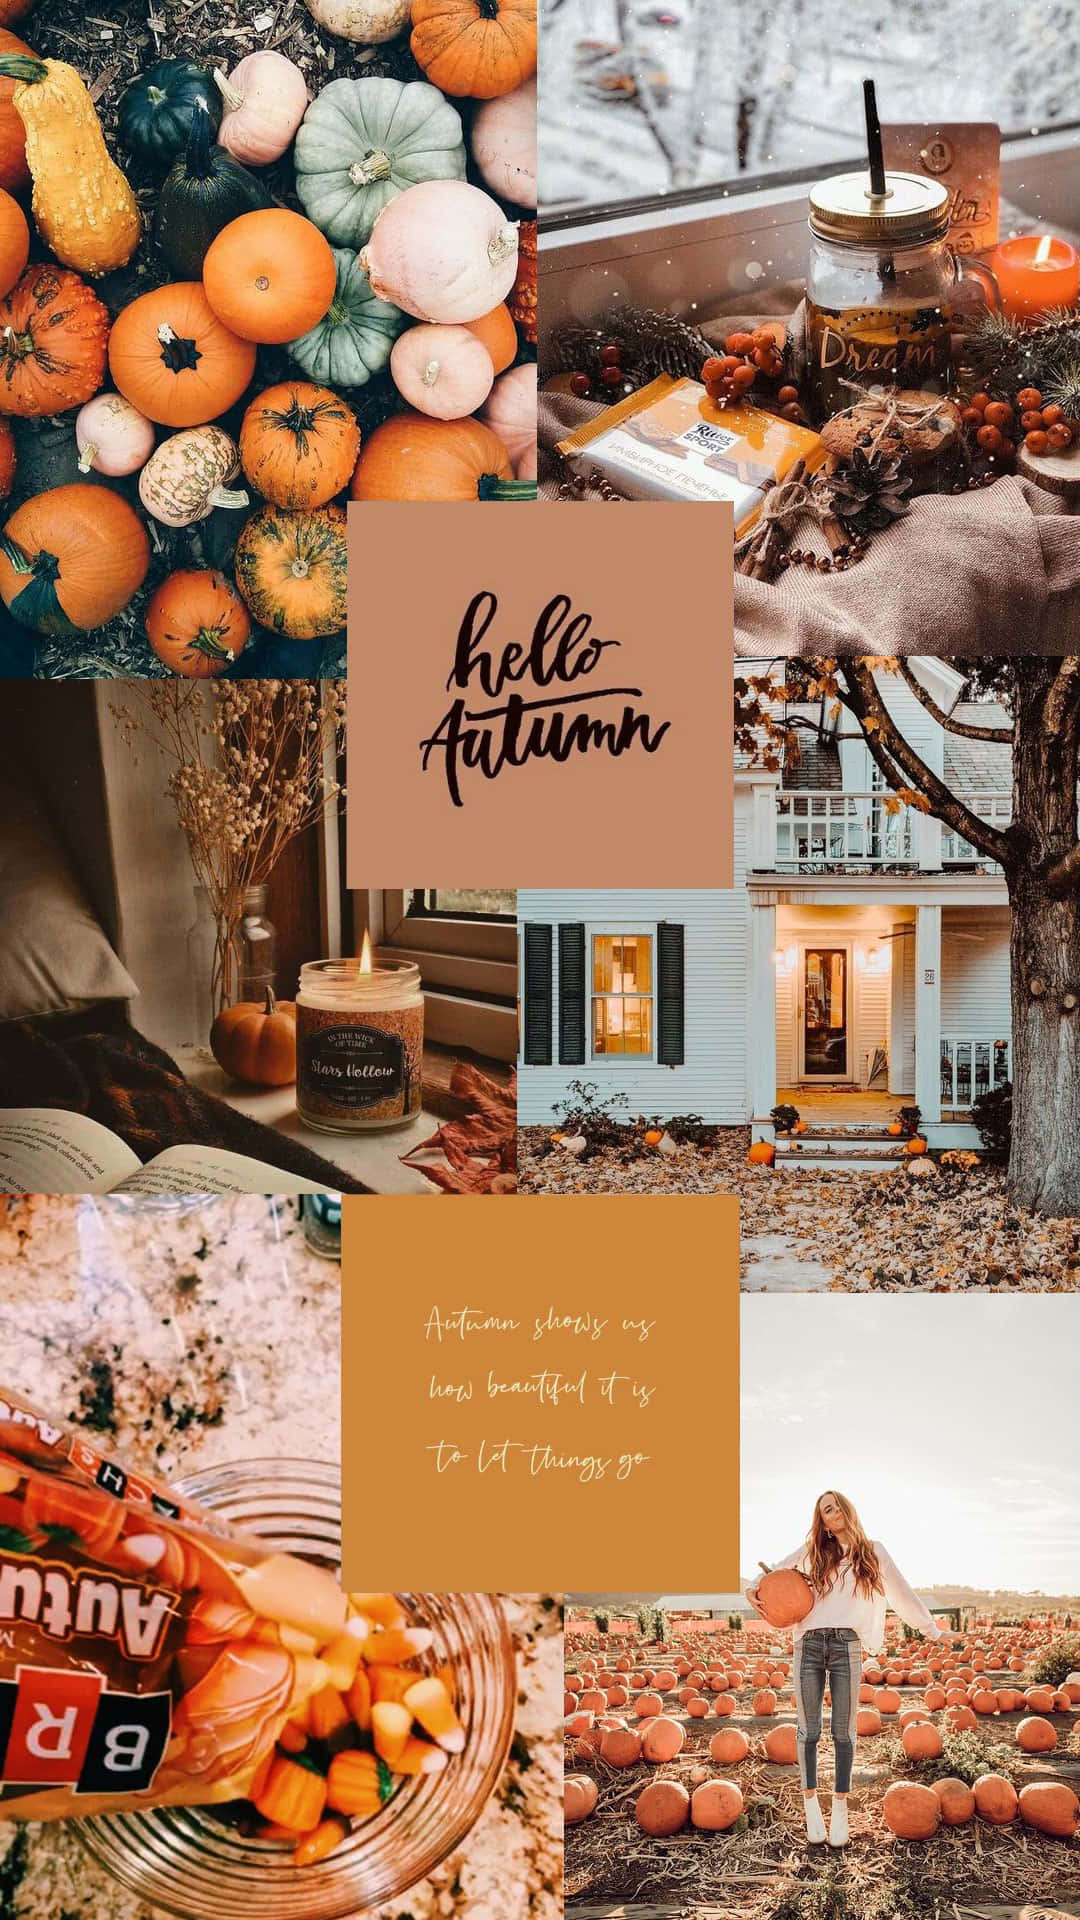 Download Hello Autumn By Samantha Mccarthy Wallpaper | Wallpapers.com